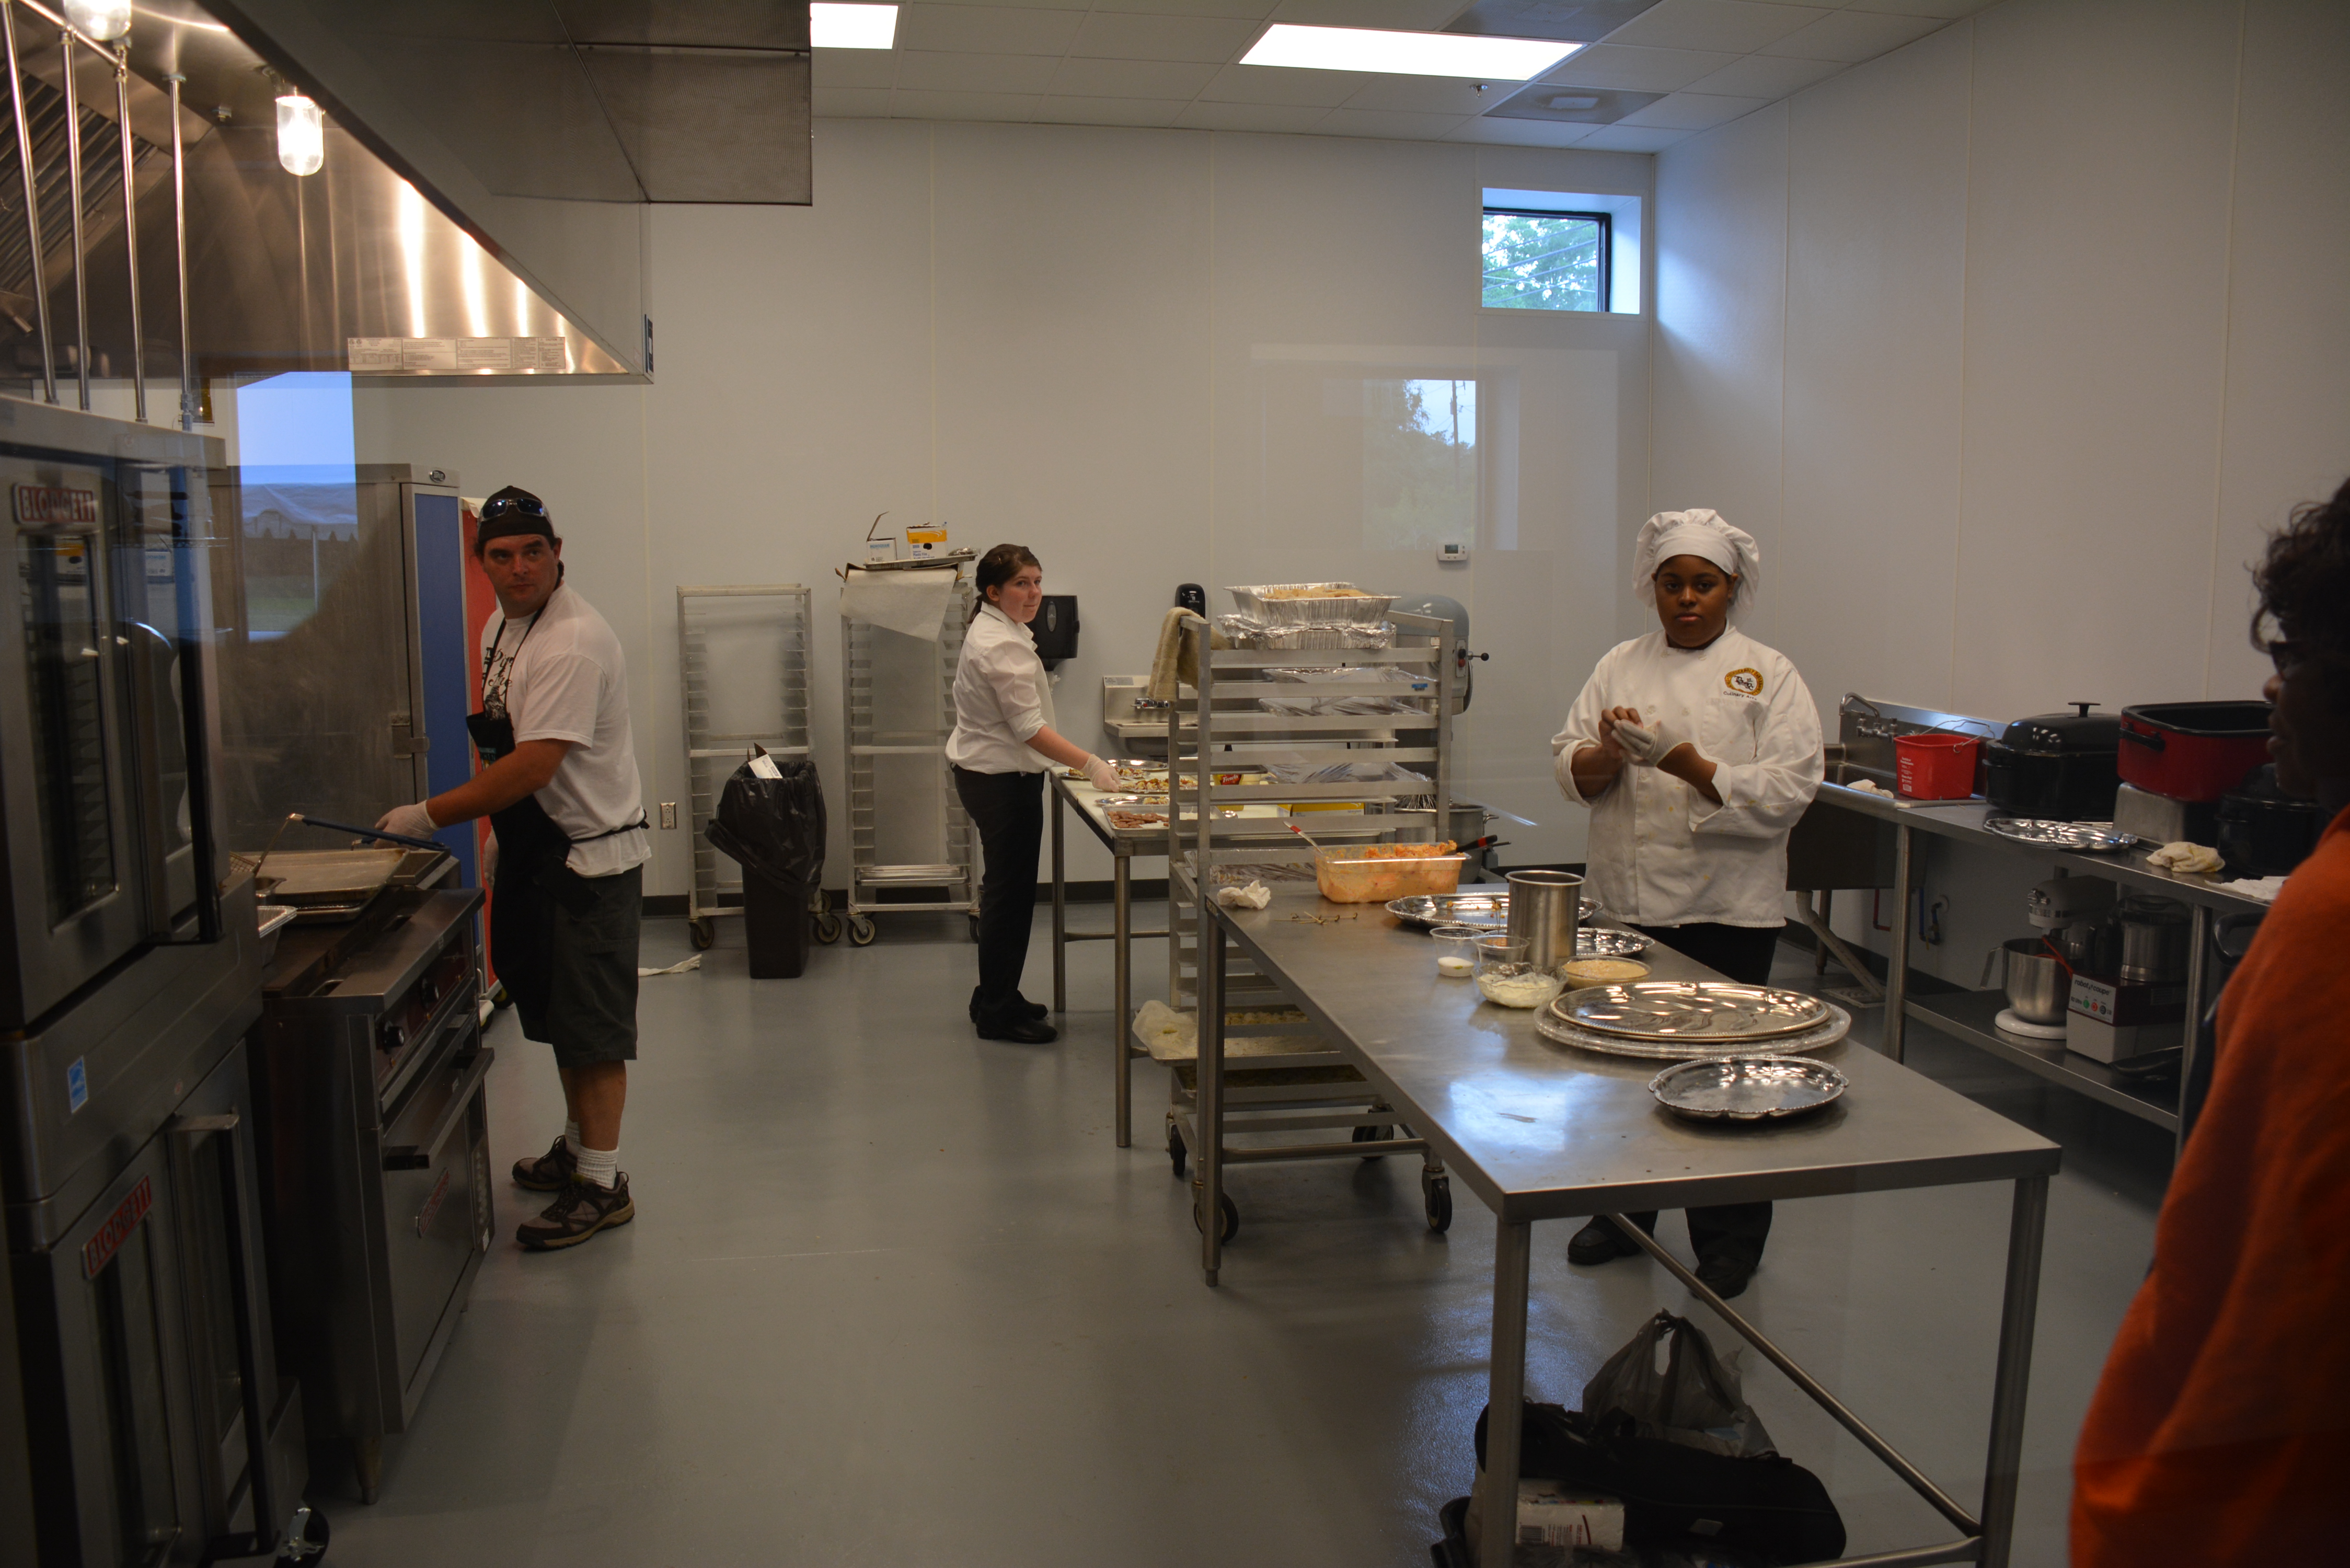 Colleton Commercial Kitchen trainees